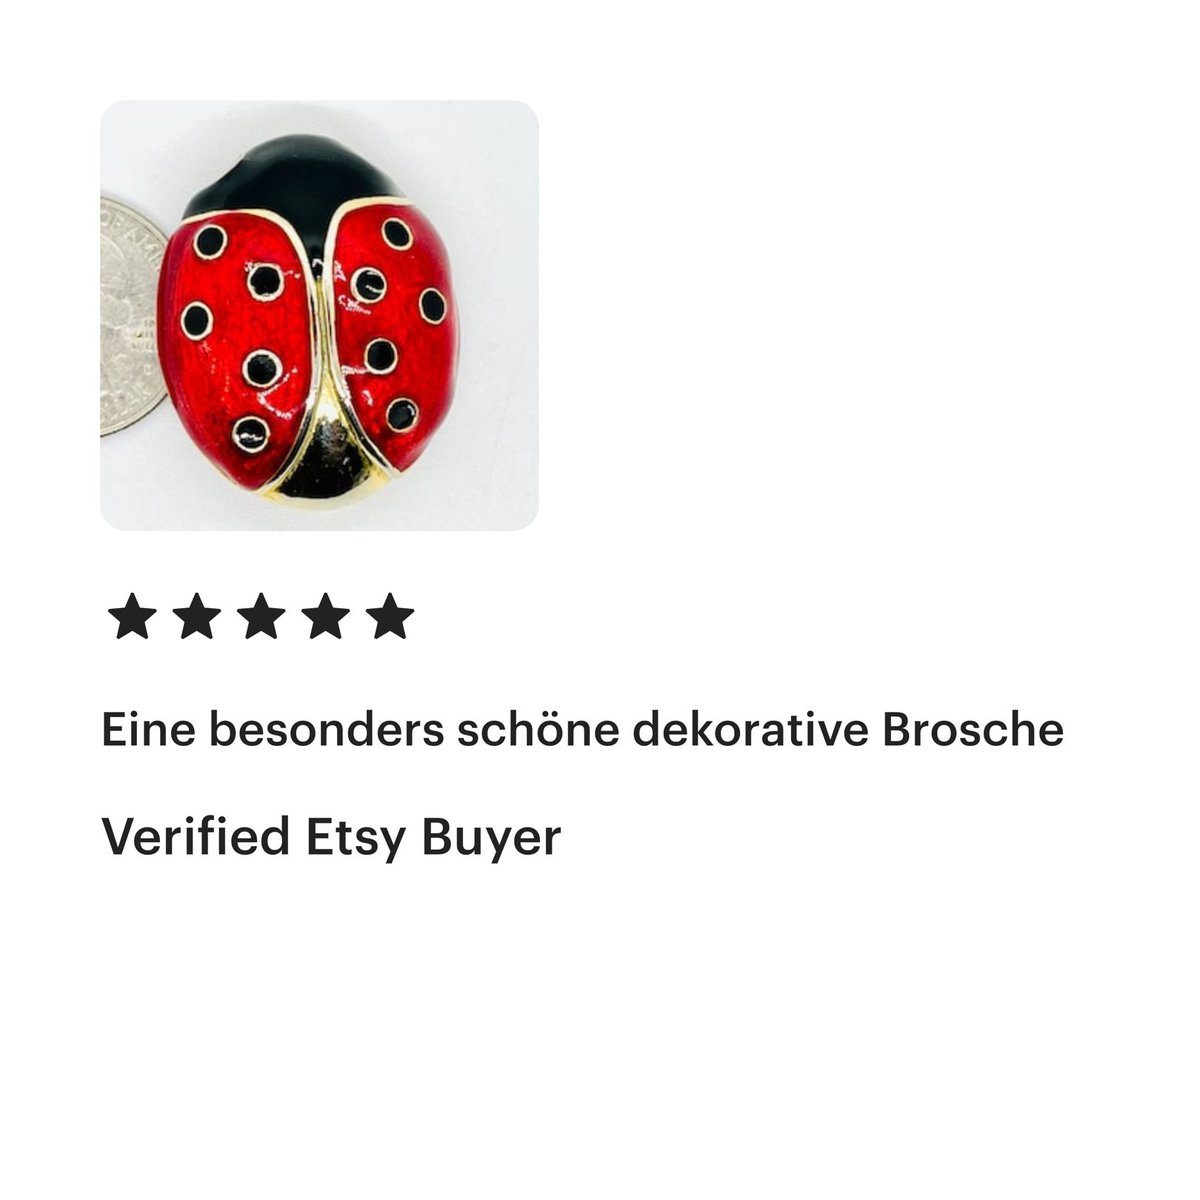 Thanks for the review ✨ #BobbyDazzlersJewelry is registered to ship to Germany bobbydazzlersjewelry.etsy.com #mhhsbd #craftbizparty #shippingtogermany #etsyvintage #figuralbrooch